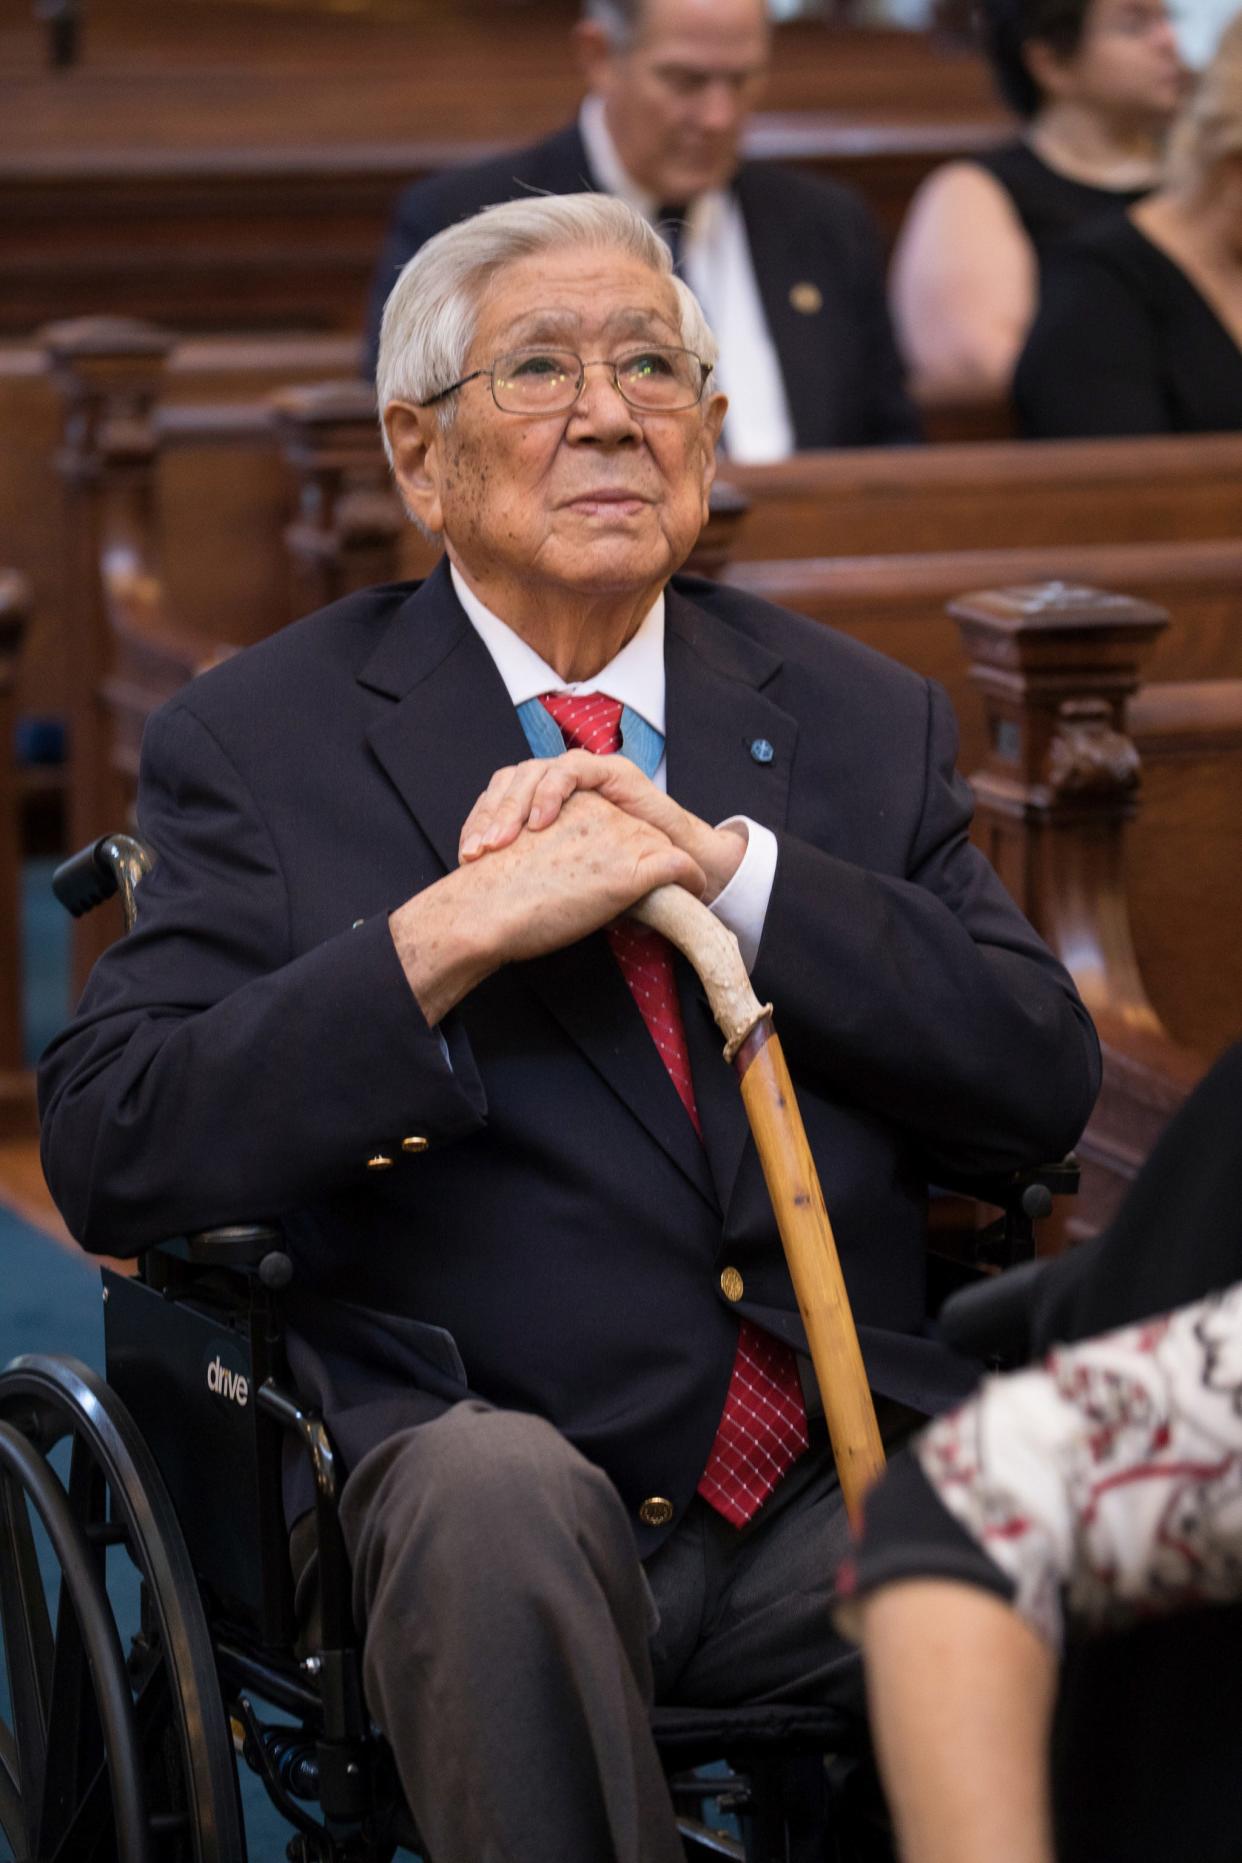 Hiroshi "Hershey" Miyamura was born in Gallup, New Mexico, on Oct. 6, 1925, and joined the U.S. Army during World War II in January 1945 as part of the all-Nisei 100th Infantry Battalion, 442nd Infantry Regiment, composed mostly of Japanese Americans.